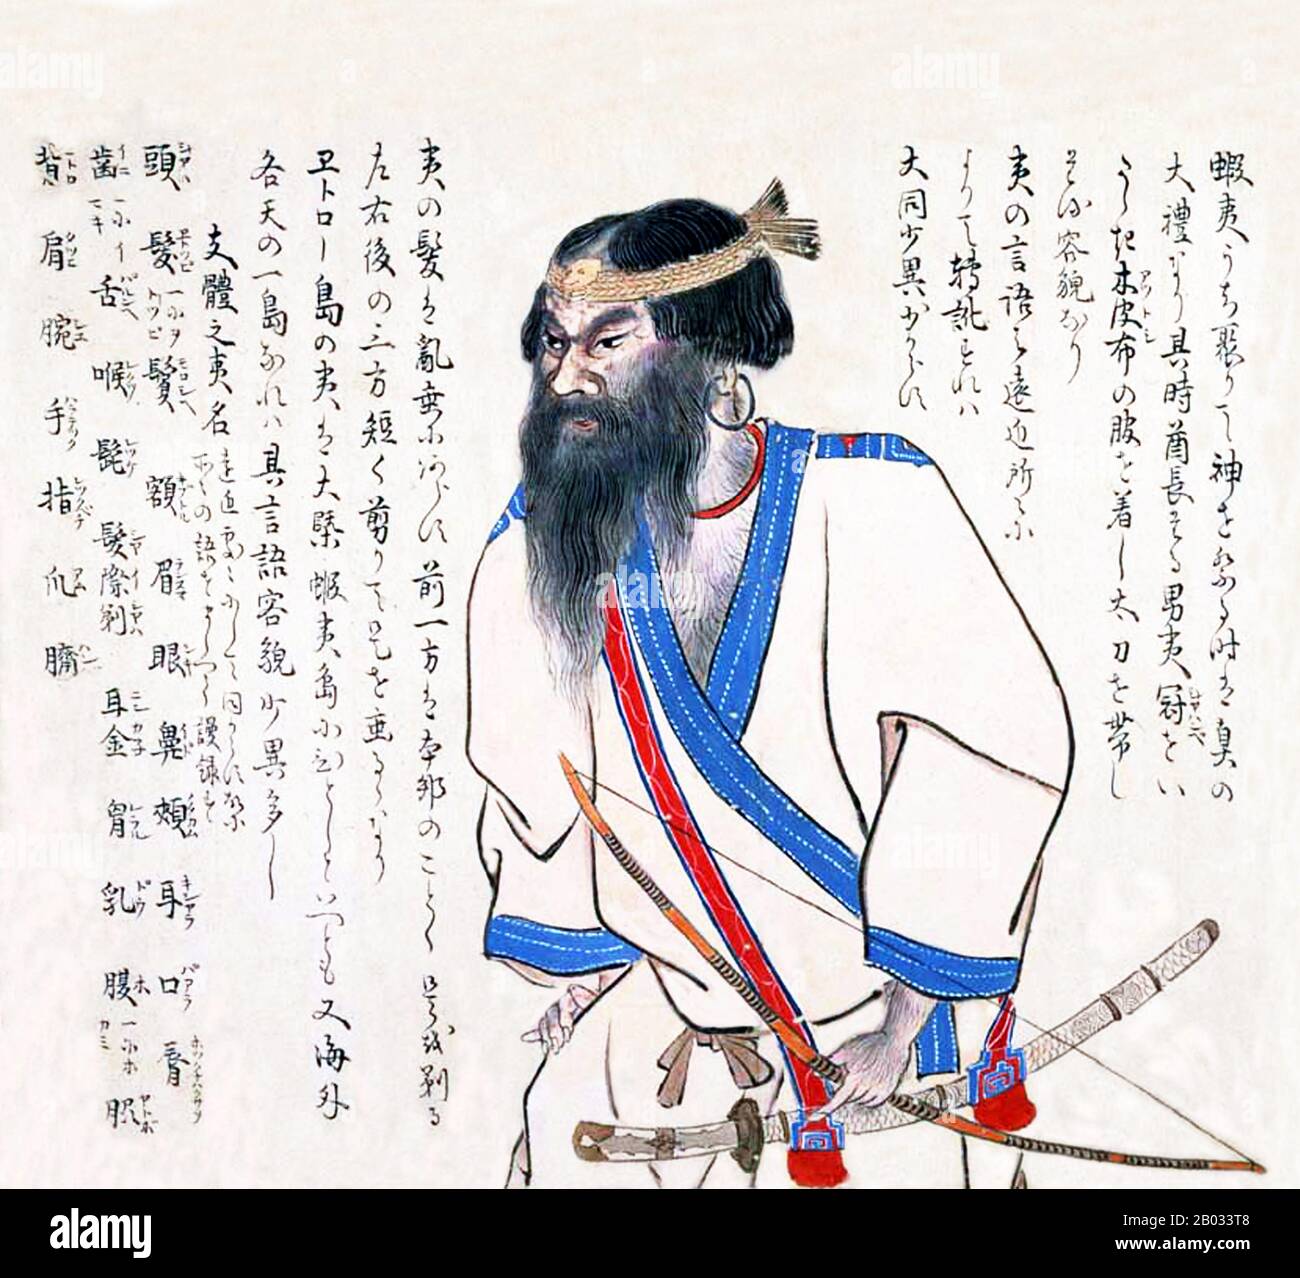 The Ezo Shima Kikan by Hata Awagimaro, completed in Kansei 11 (1799) is considered the most notable work depicting the contemporaneous lives of the Ainu.  The Ainu or in historical Japanese texts Ezo, are an indigenous people of Japan (Hokkaido, and formerly northeastern Honshu) and Russia (Sakhalin and the Kuril Islands). Stock Photo